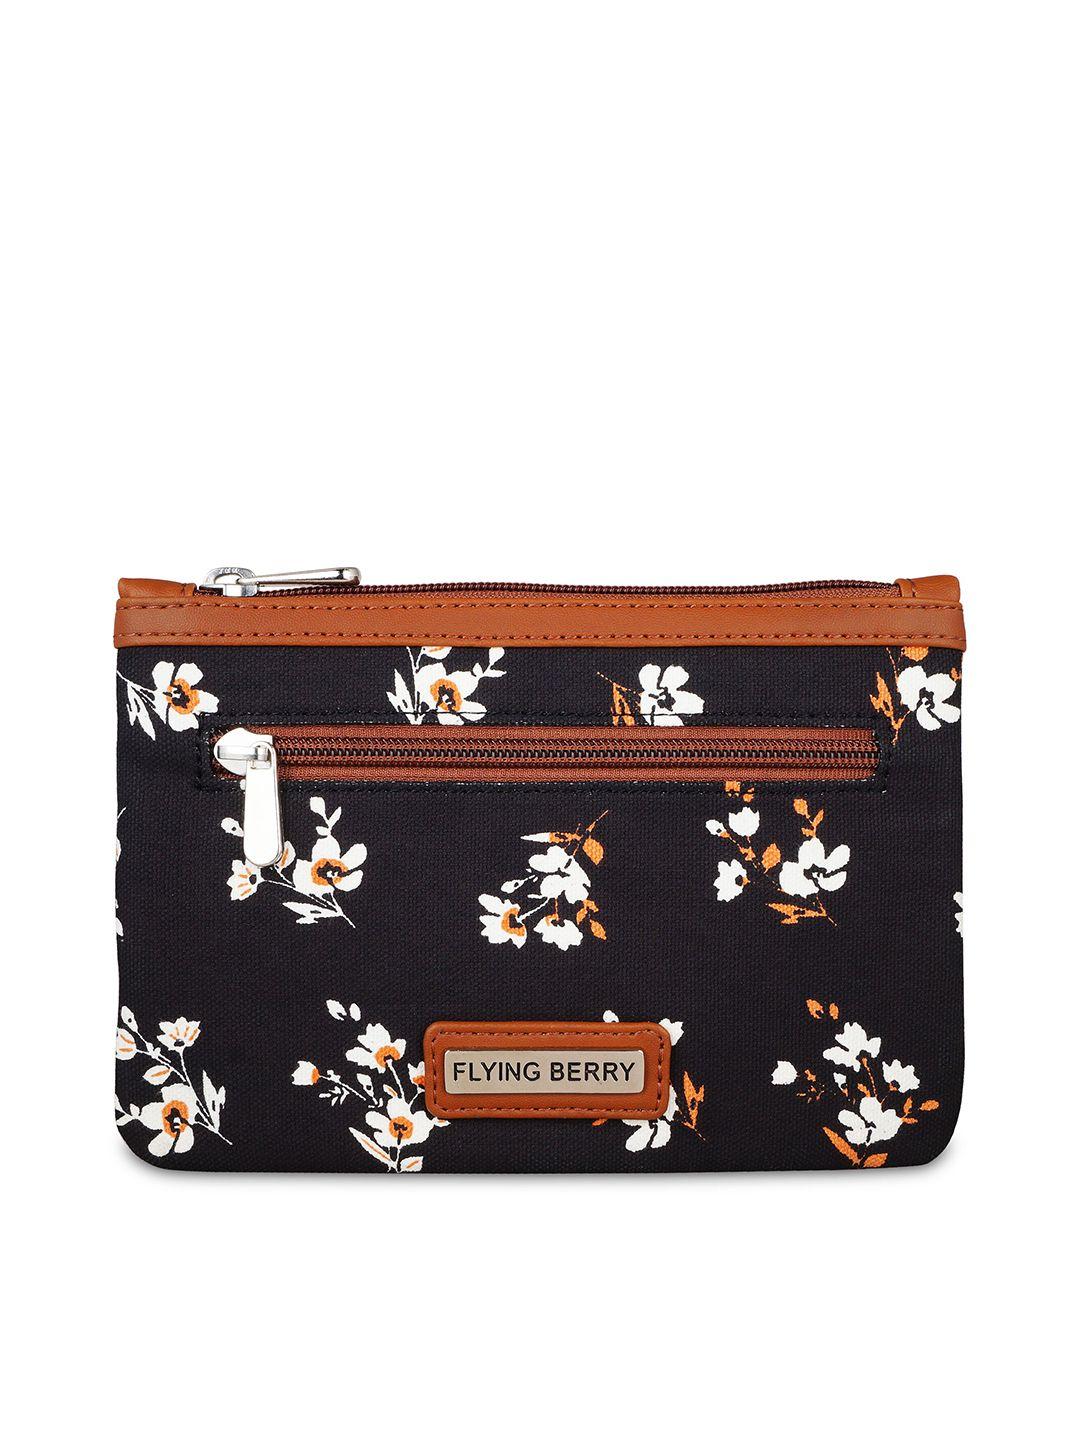 flying berry floral printed structured shoulder bag with pouch